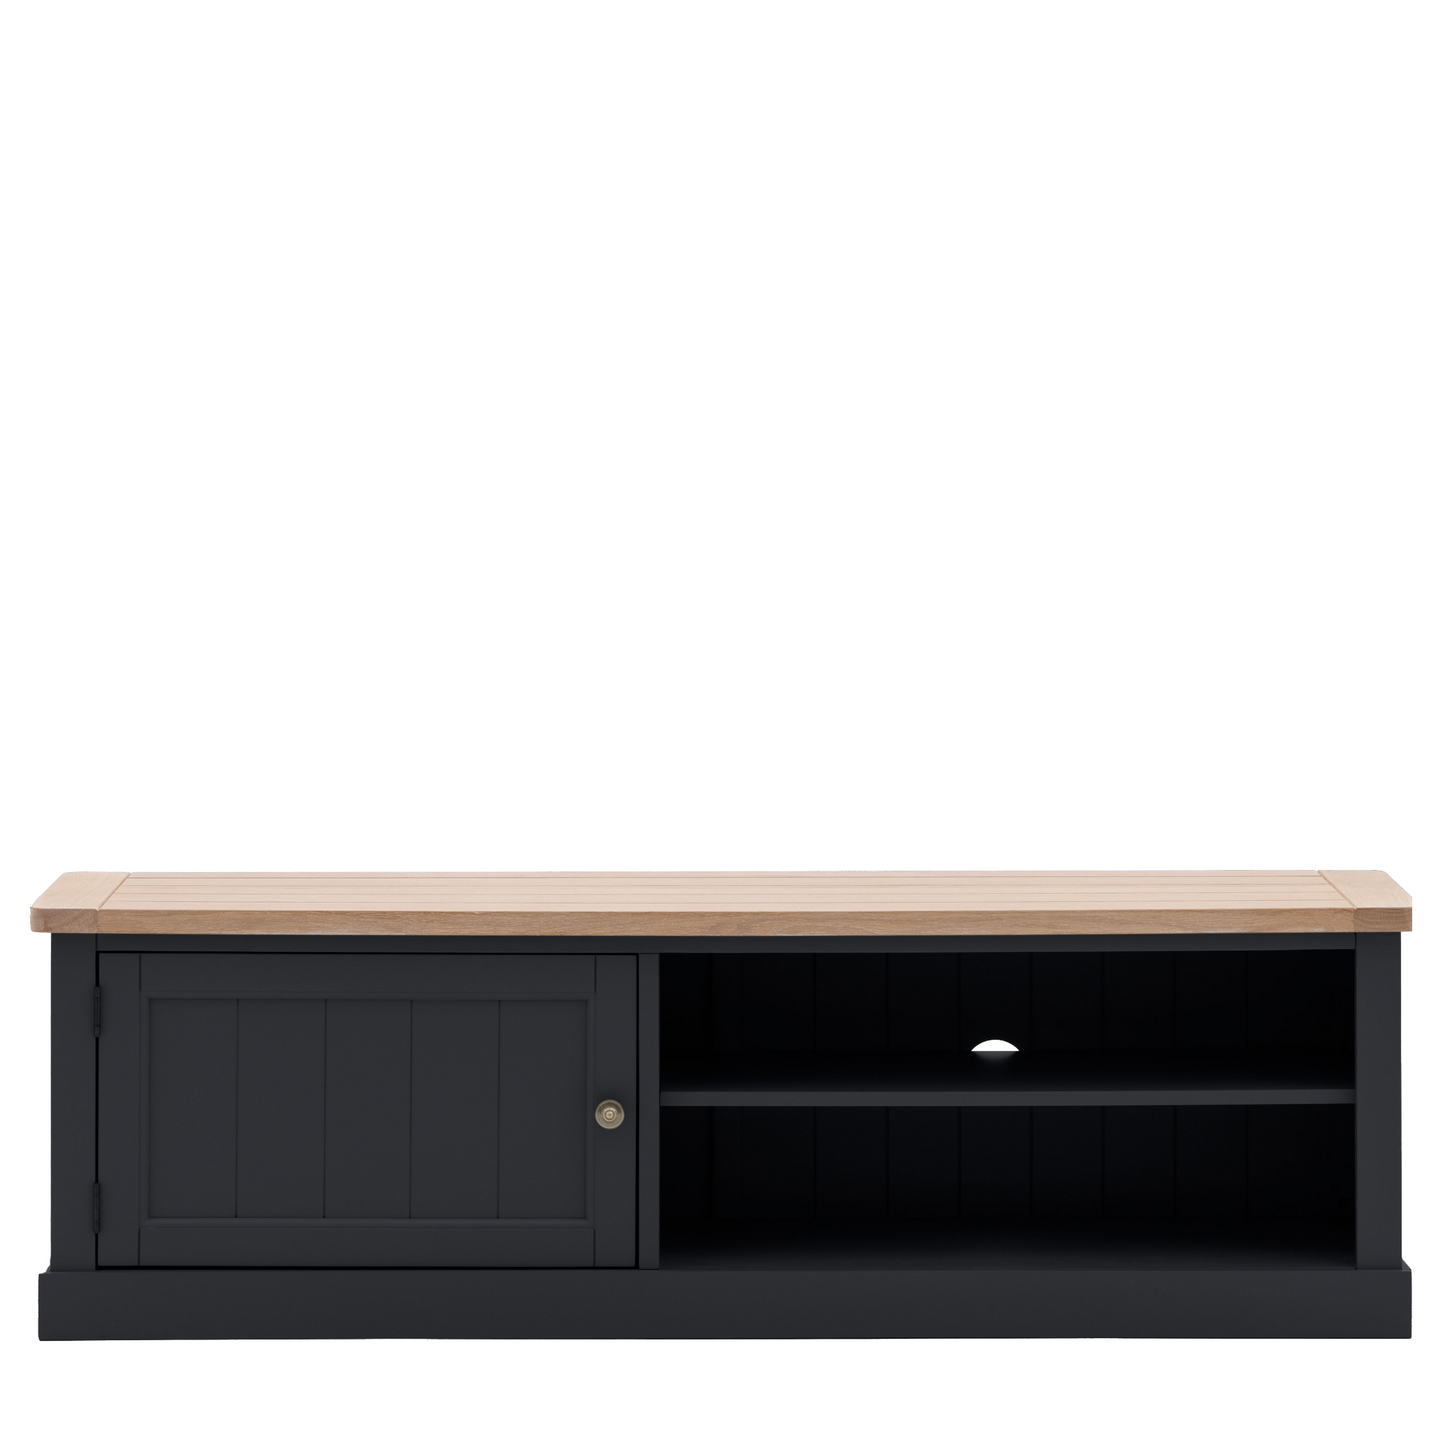 A black Buckland Media Unit 1400x375x450mm in Meteor with a wooden top for interior decor purposes.